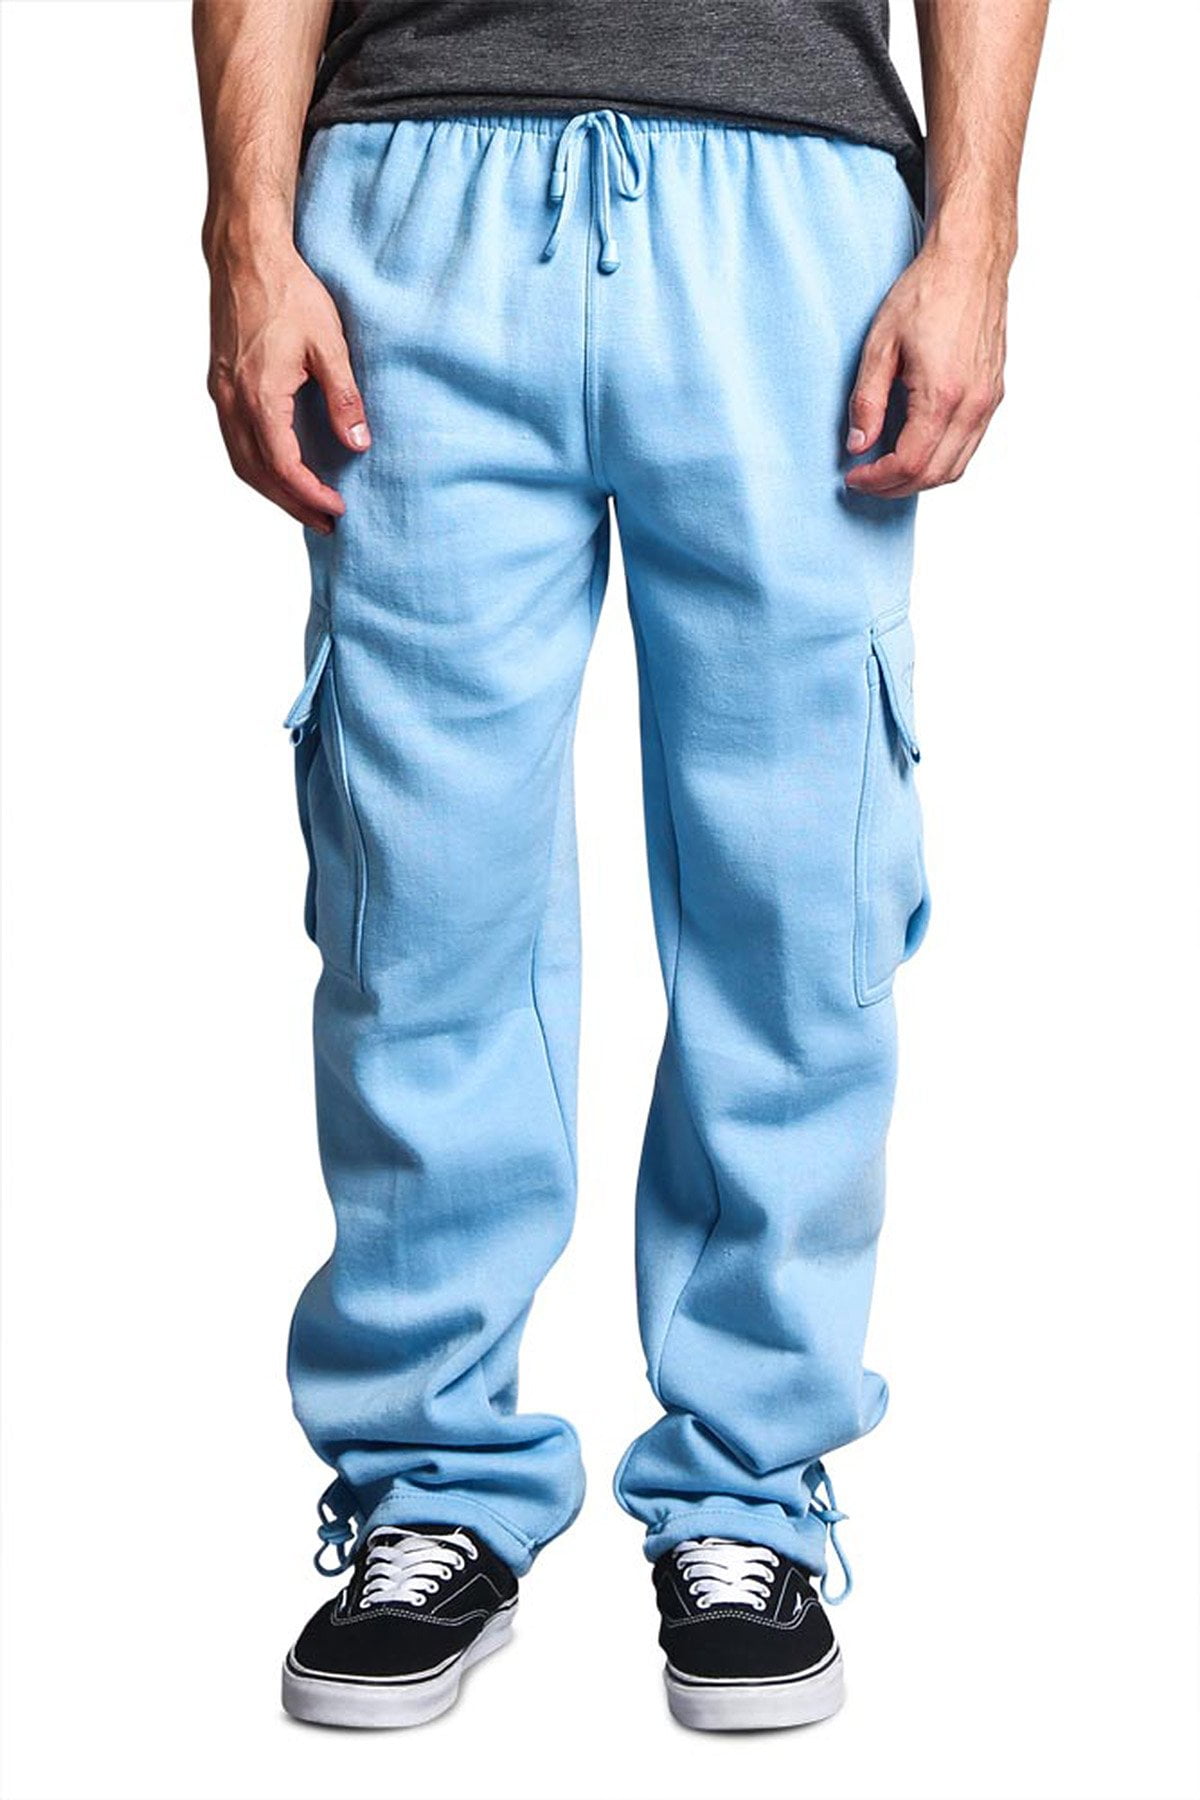 Victorious Men's Heavyweight Fleece Relaxed Lounge Cargo Sweatpants - Sky  Blue - Small